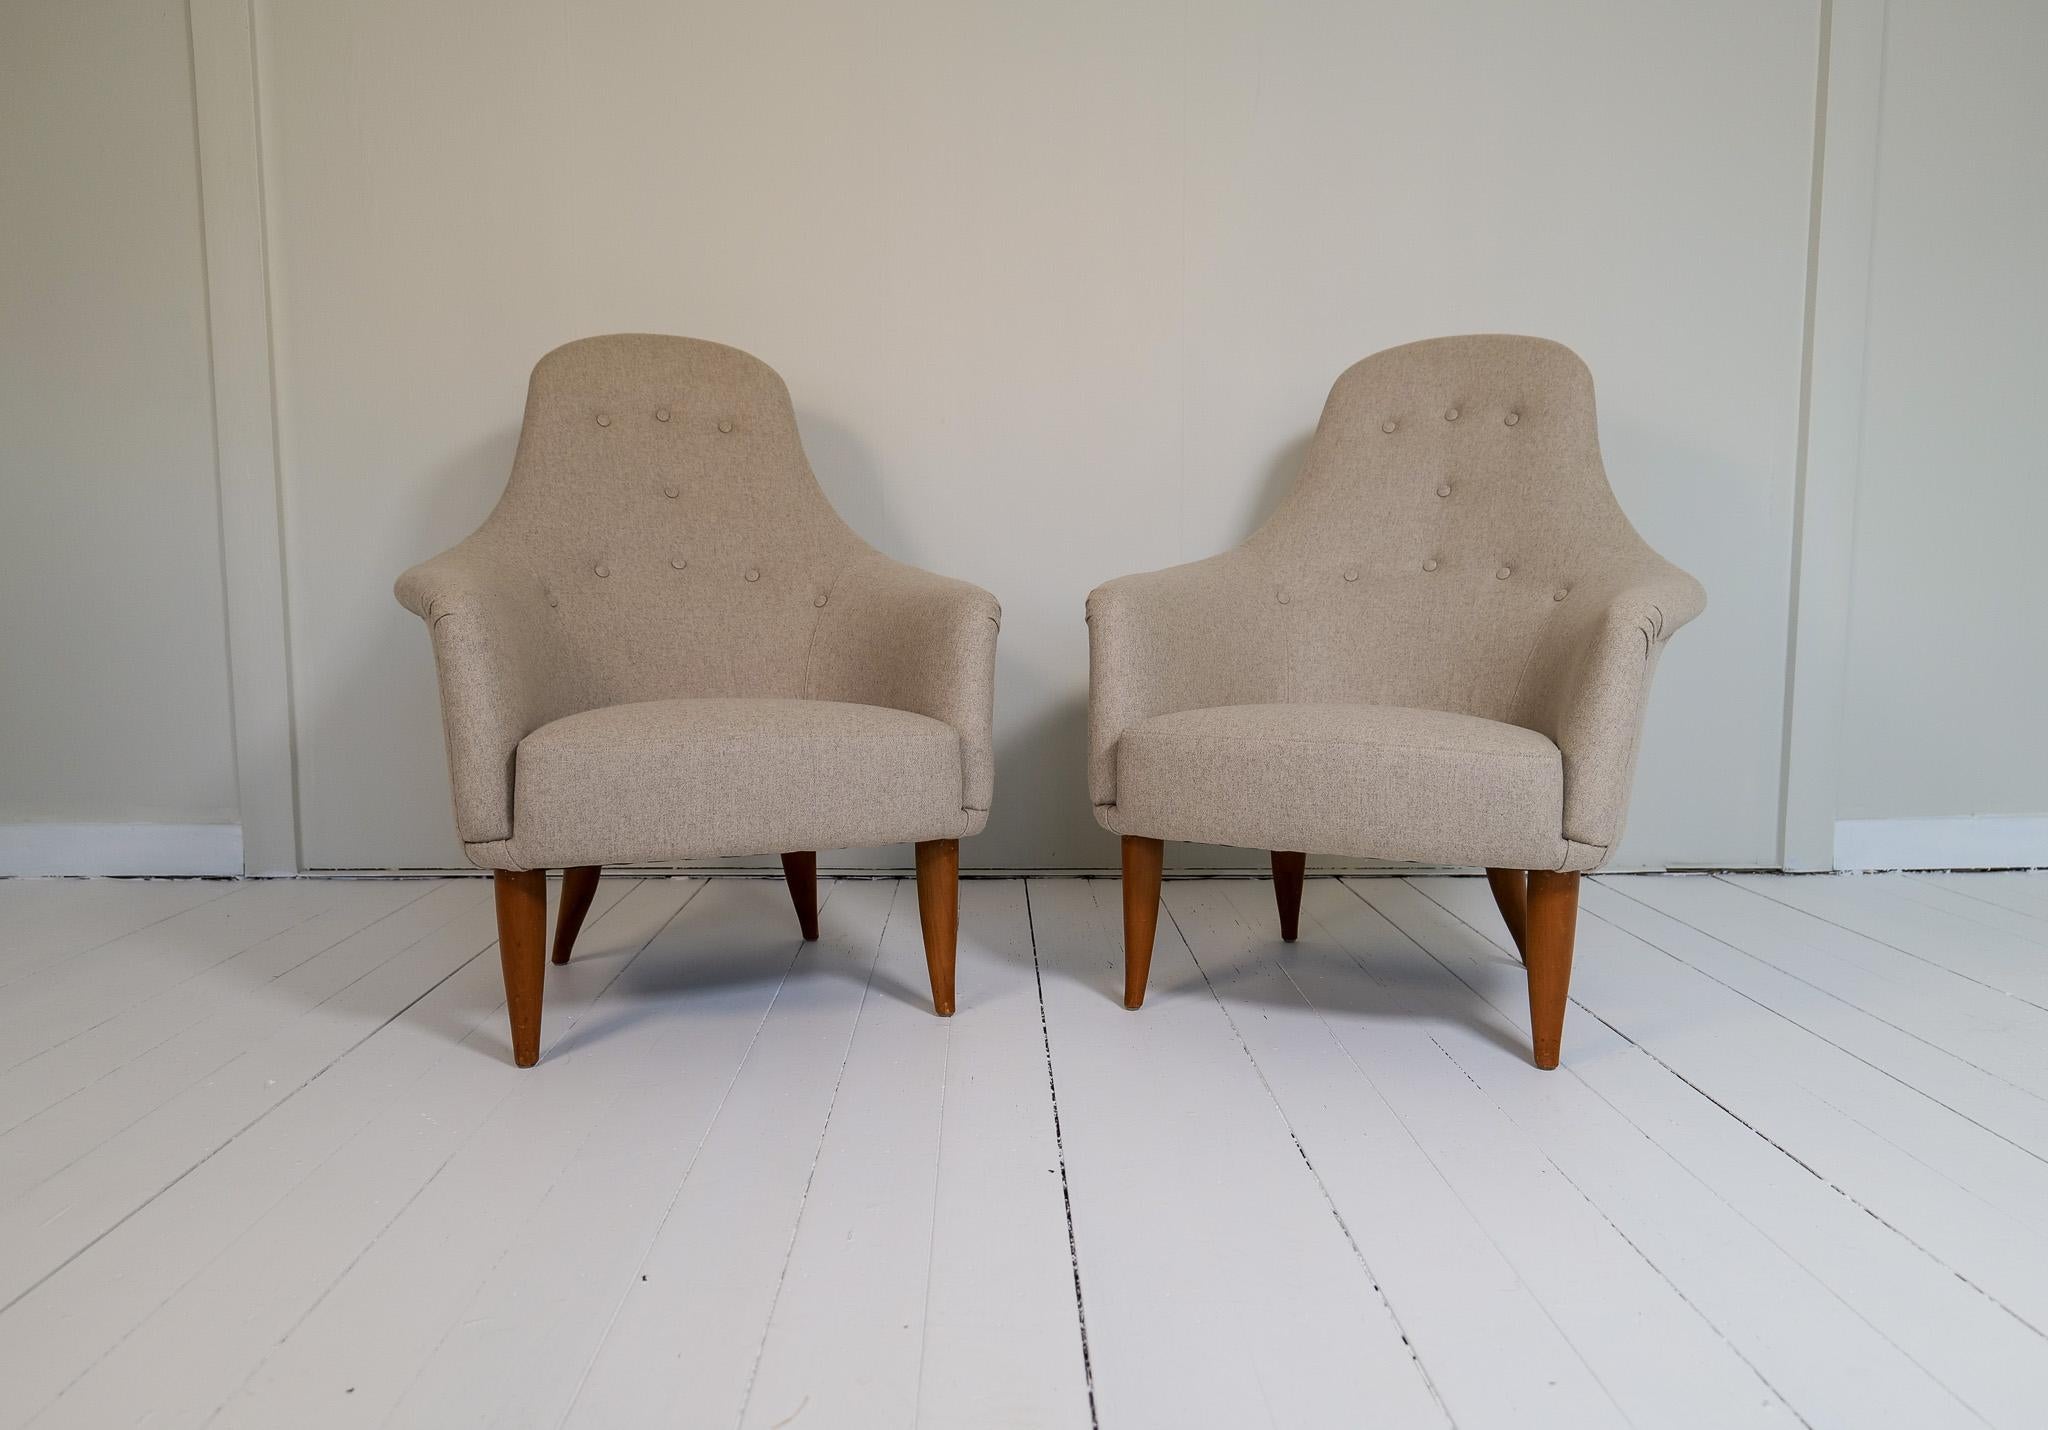 This set of two lounge chairs with elegant and sensual forms was named “Big Adam” and was a series 